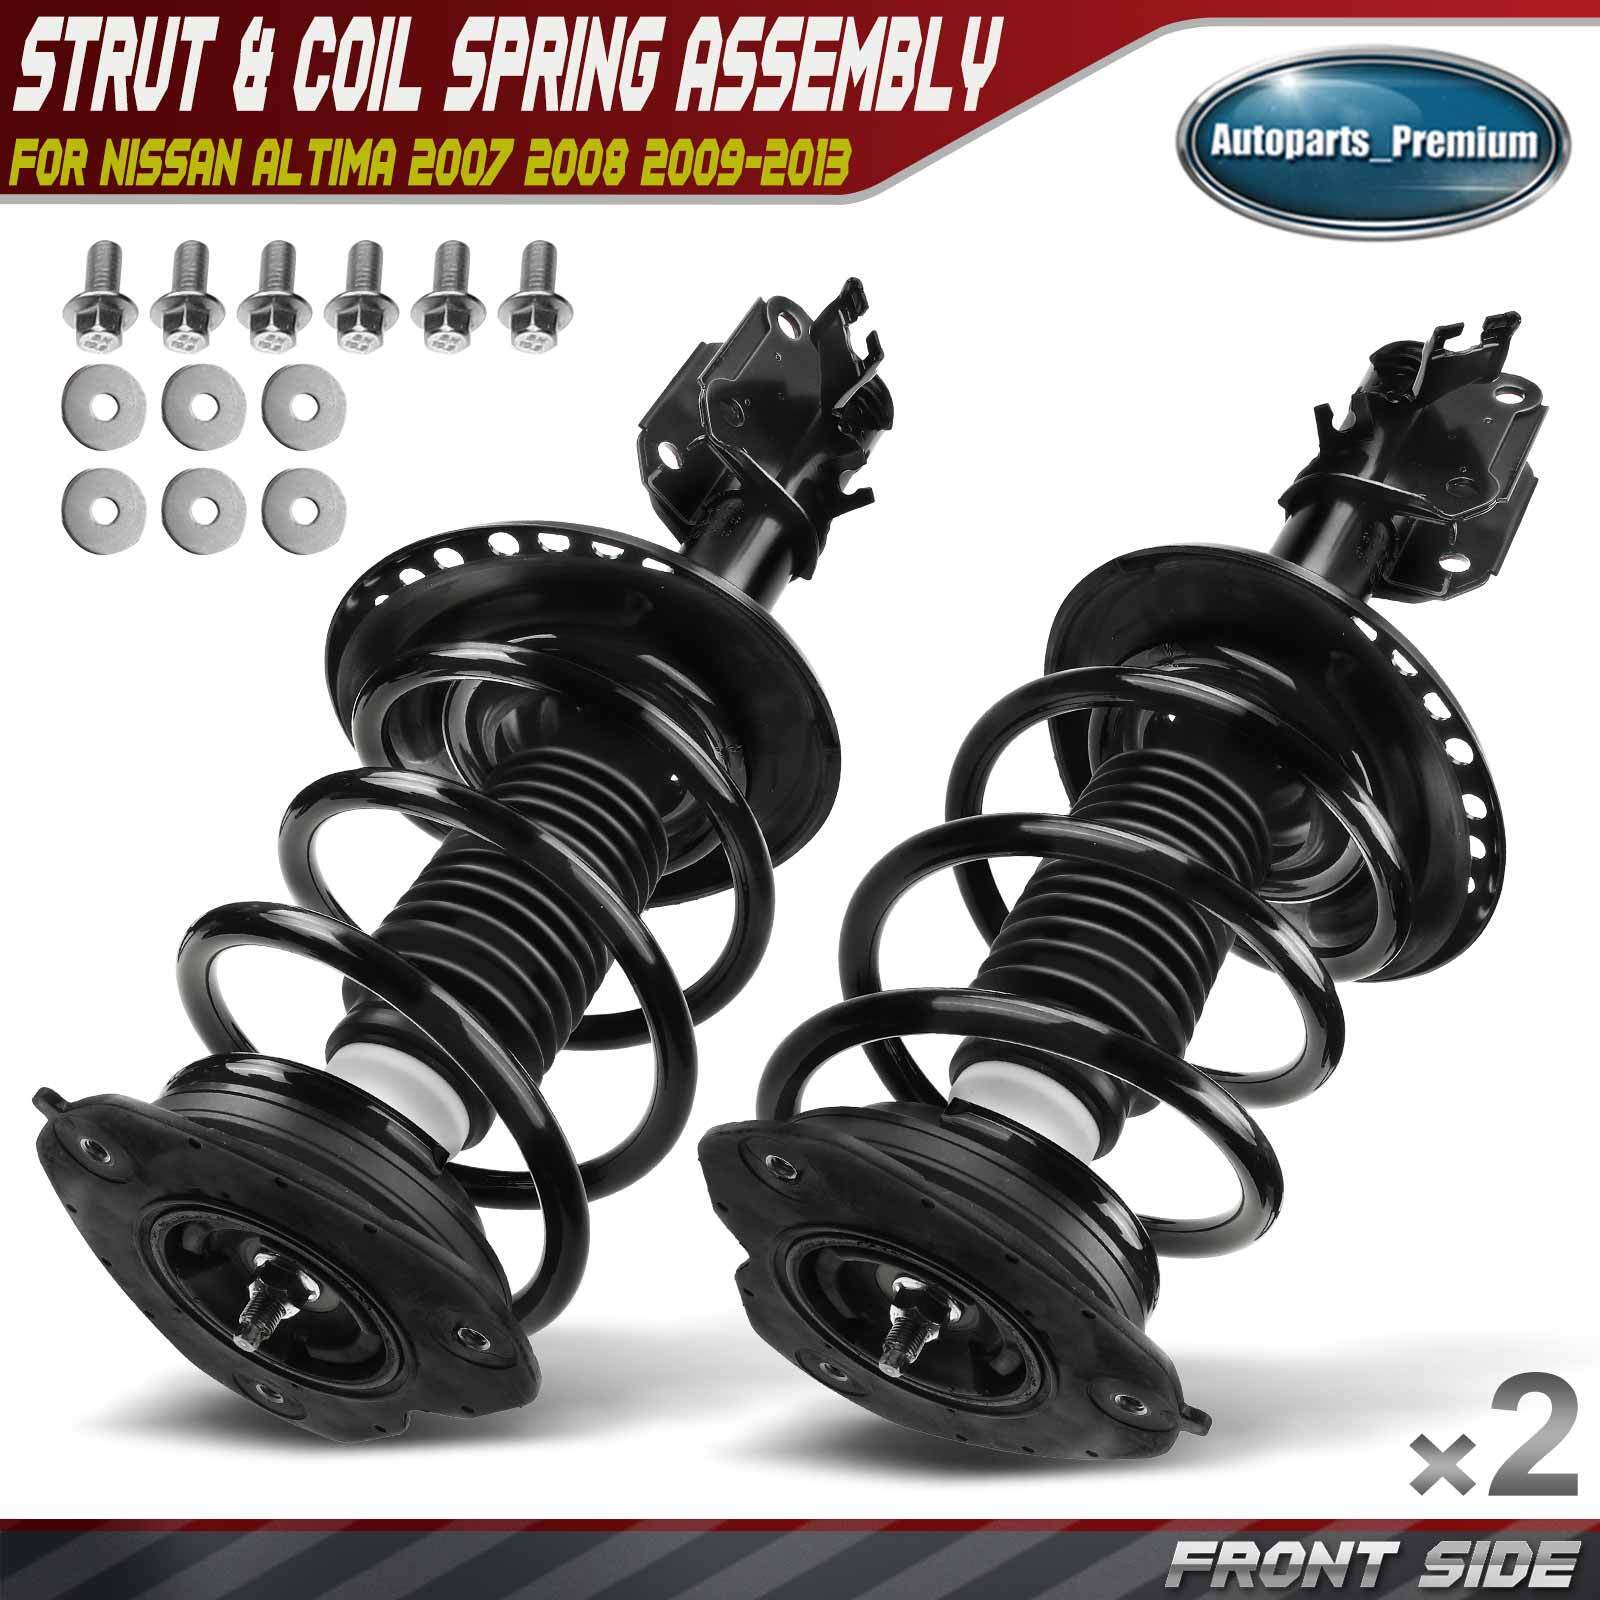 2x Front L&R Complete Strut & Coil Spring Assembly for Nissan Altima 2007-2013